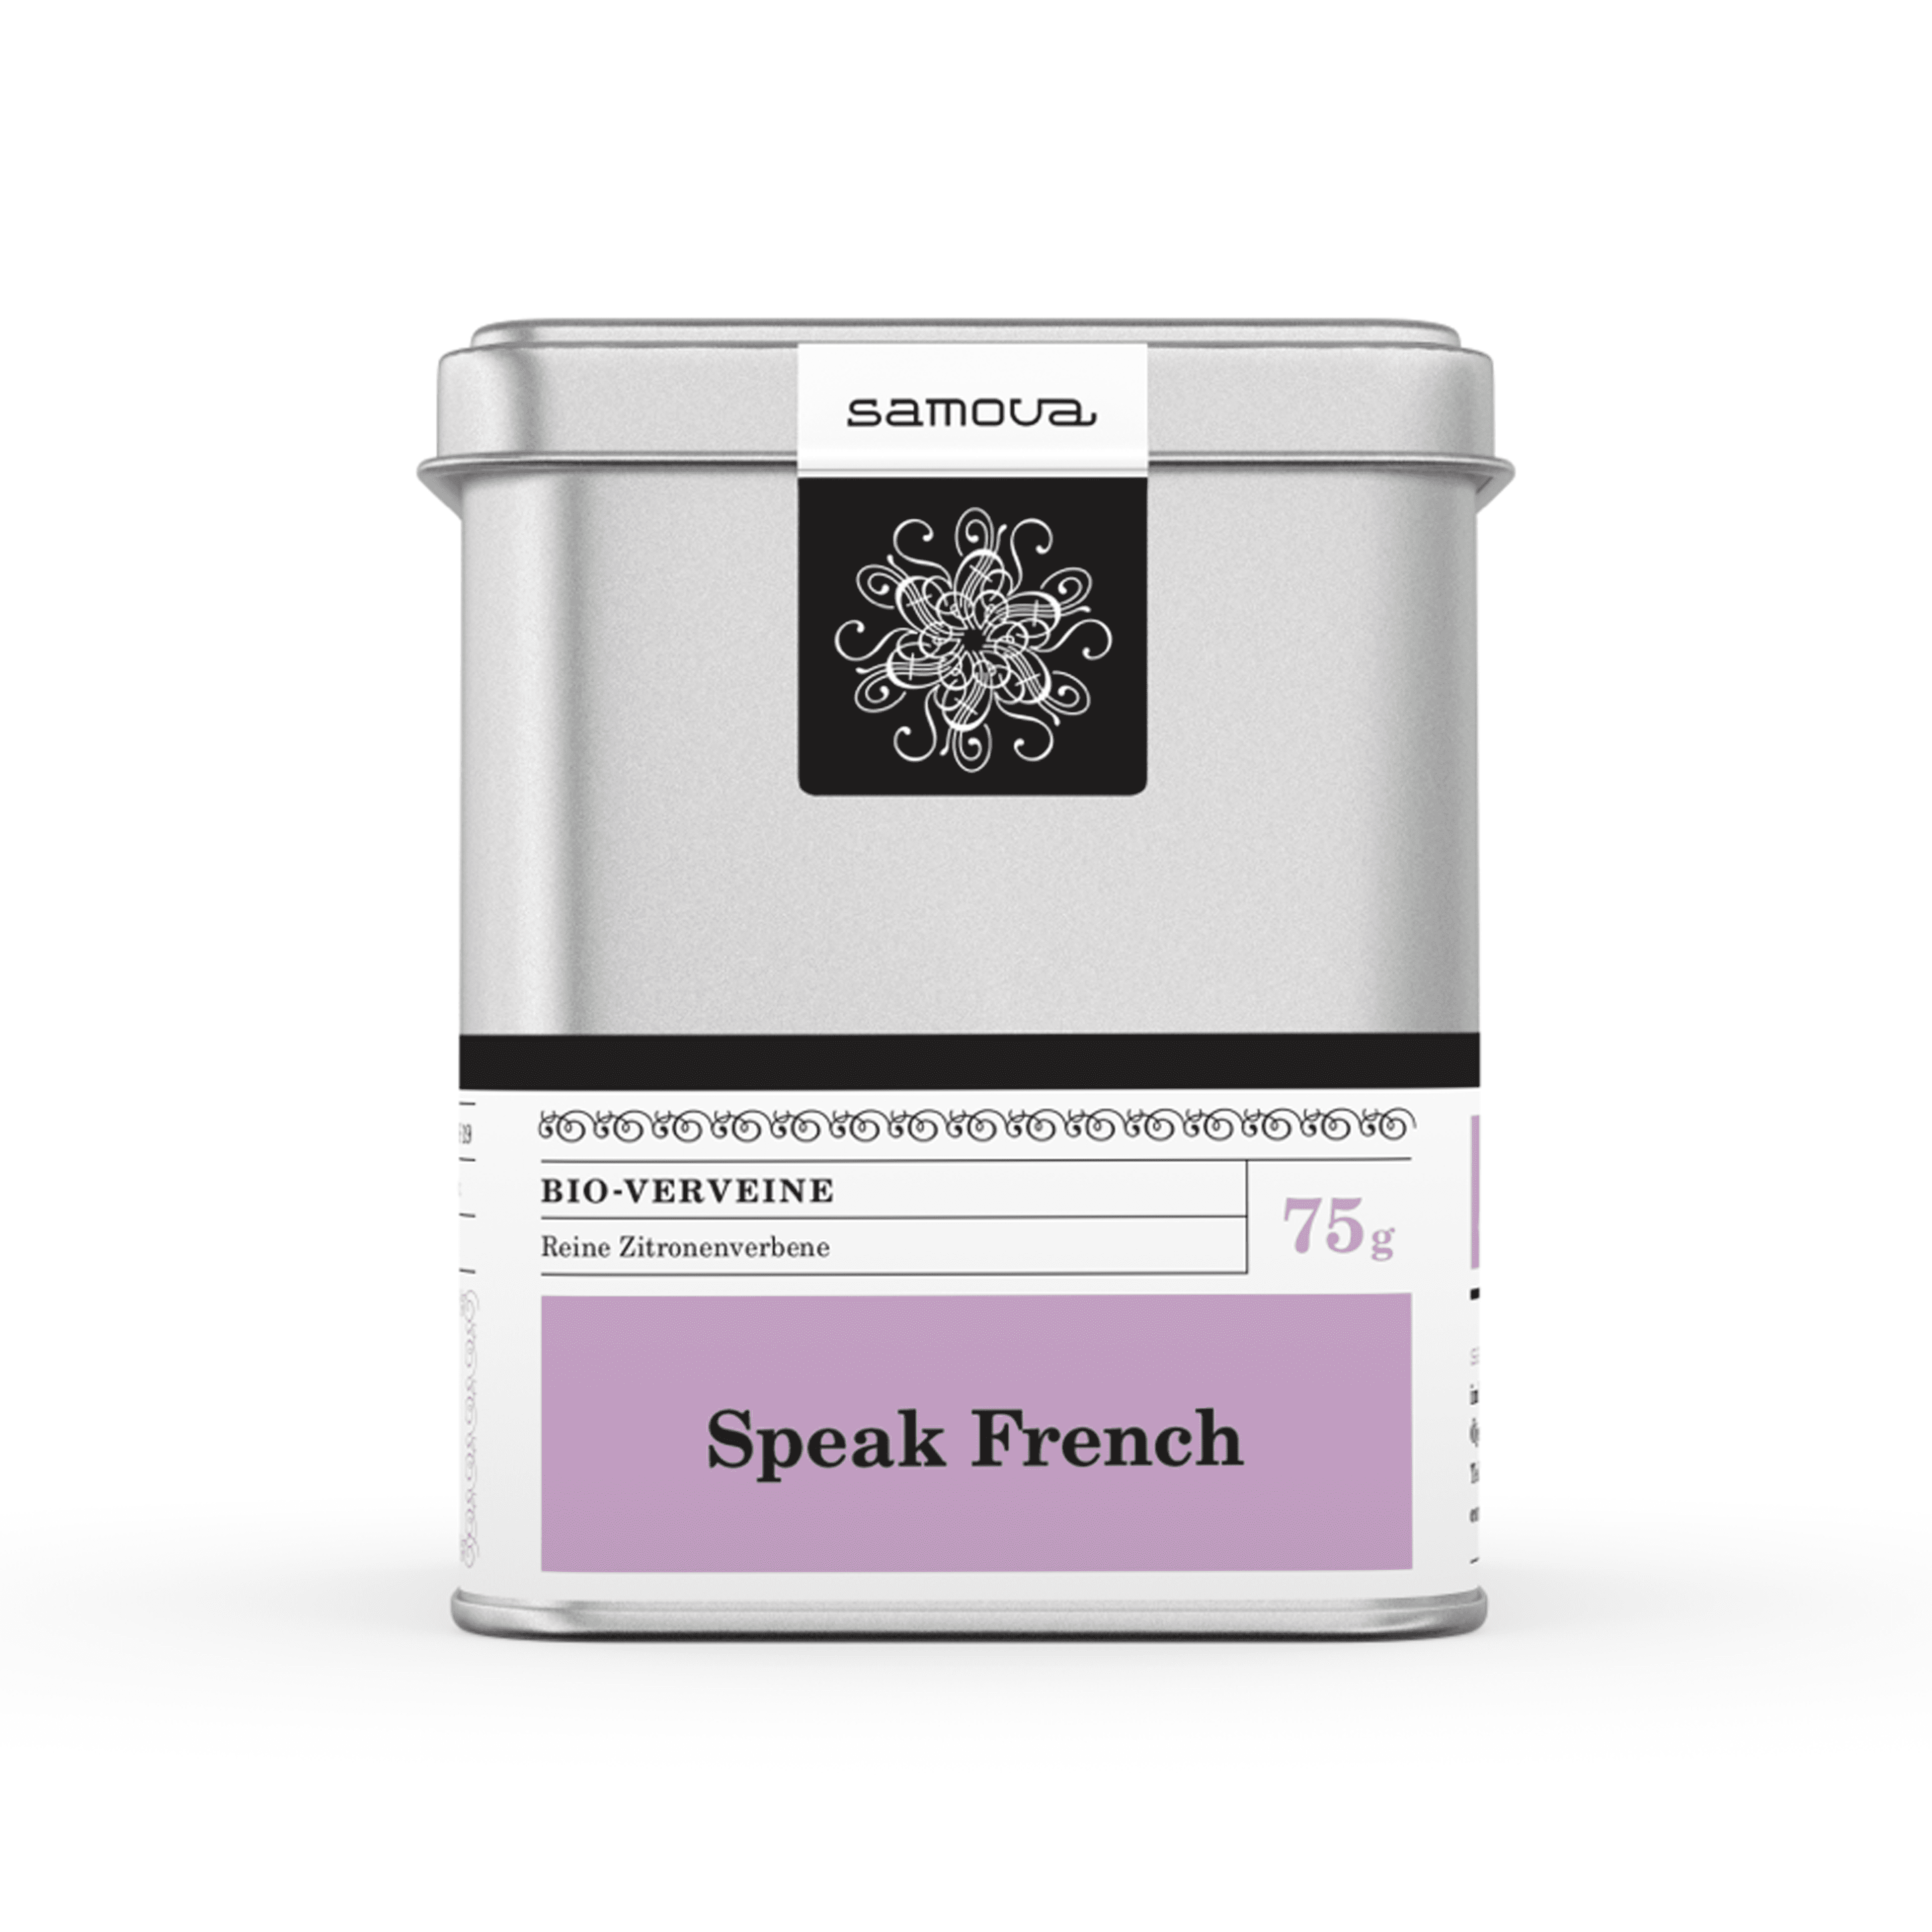 Can of Speak French tea